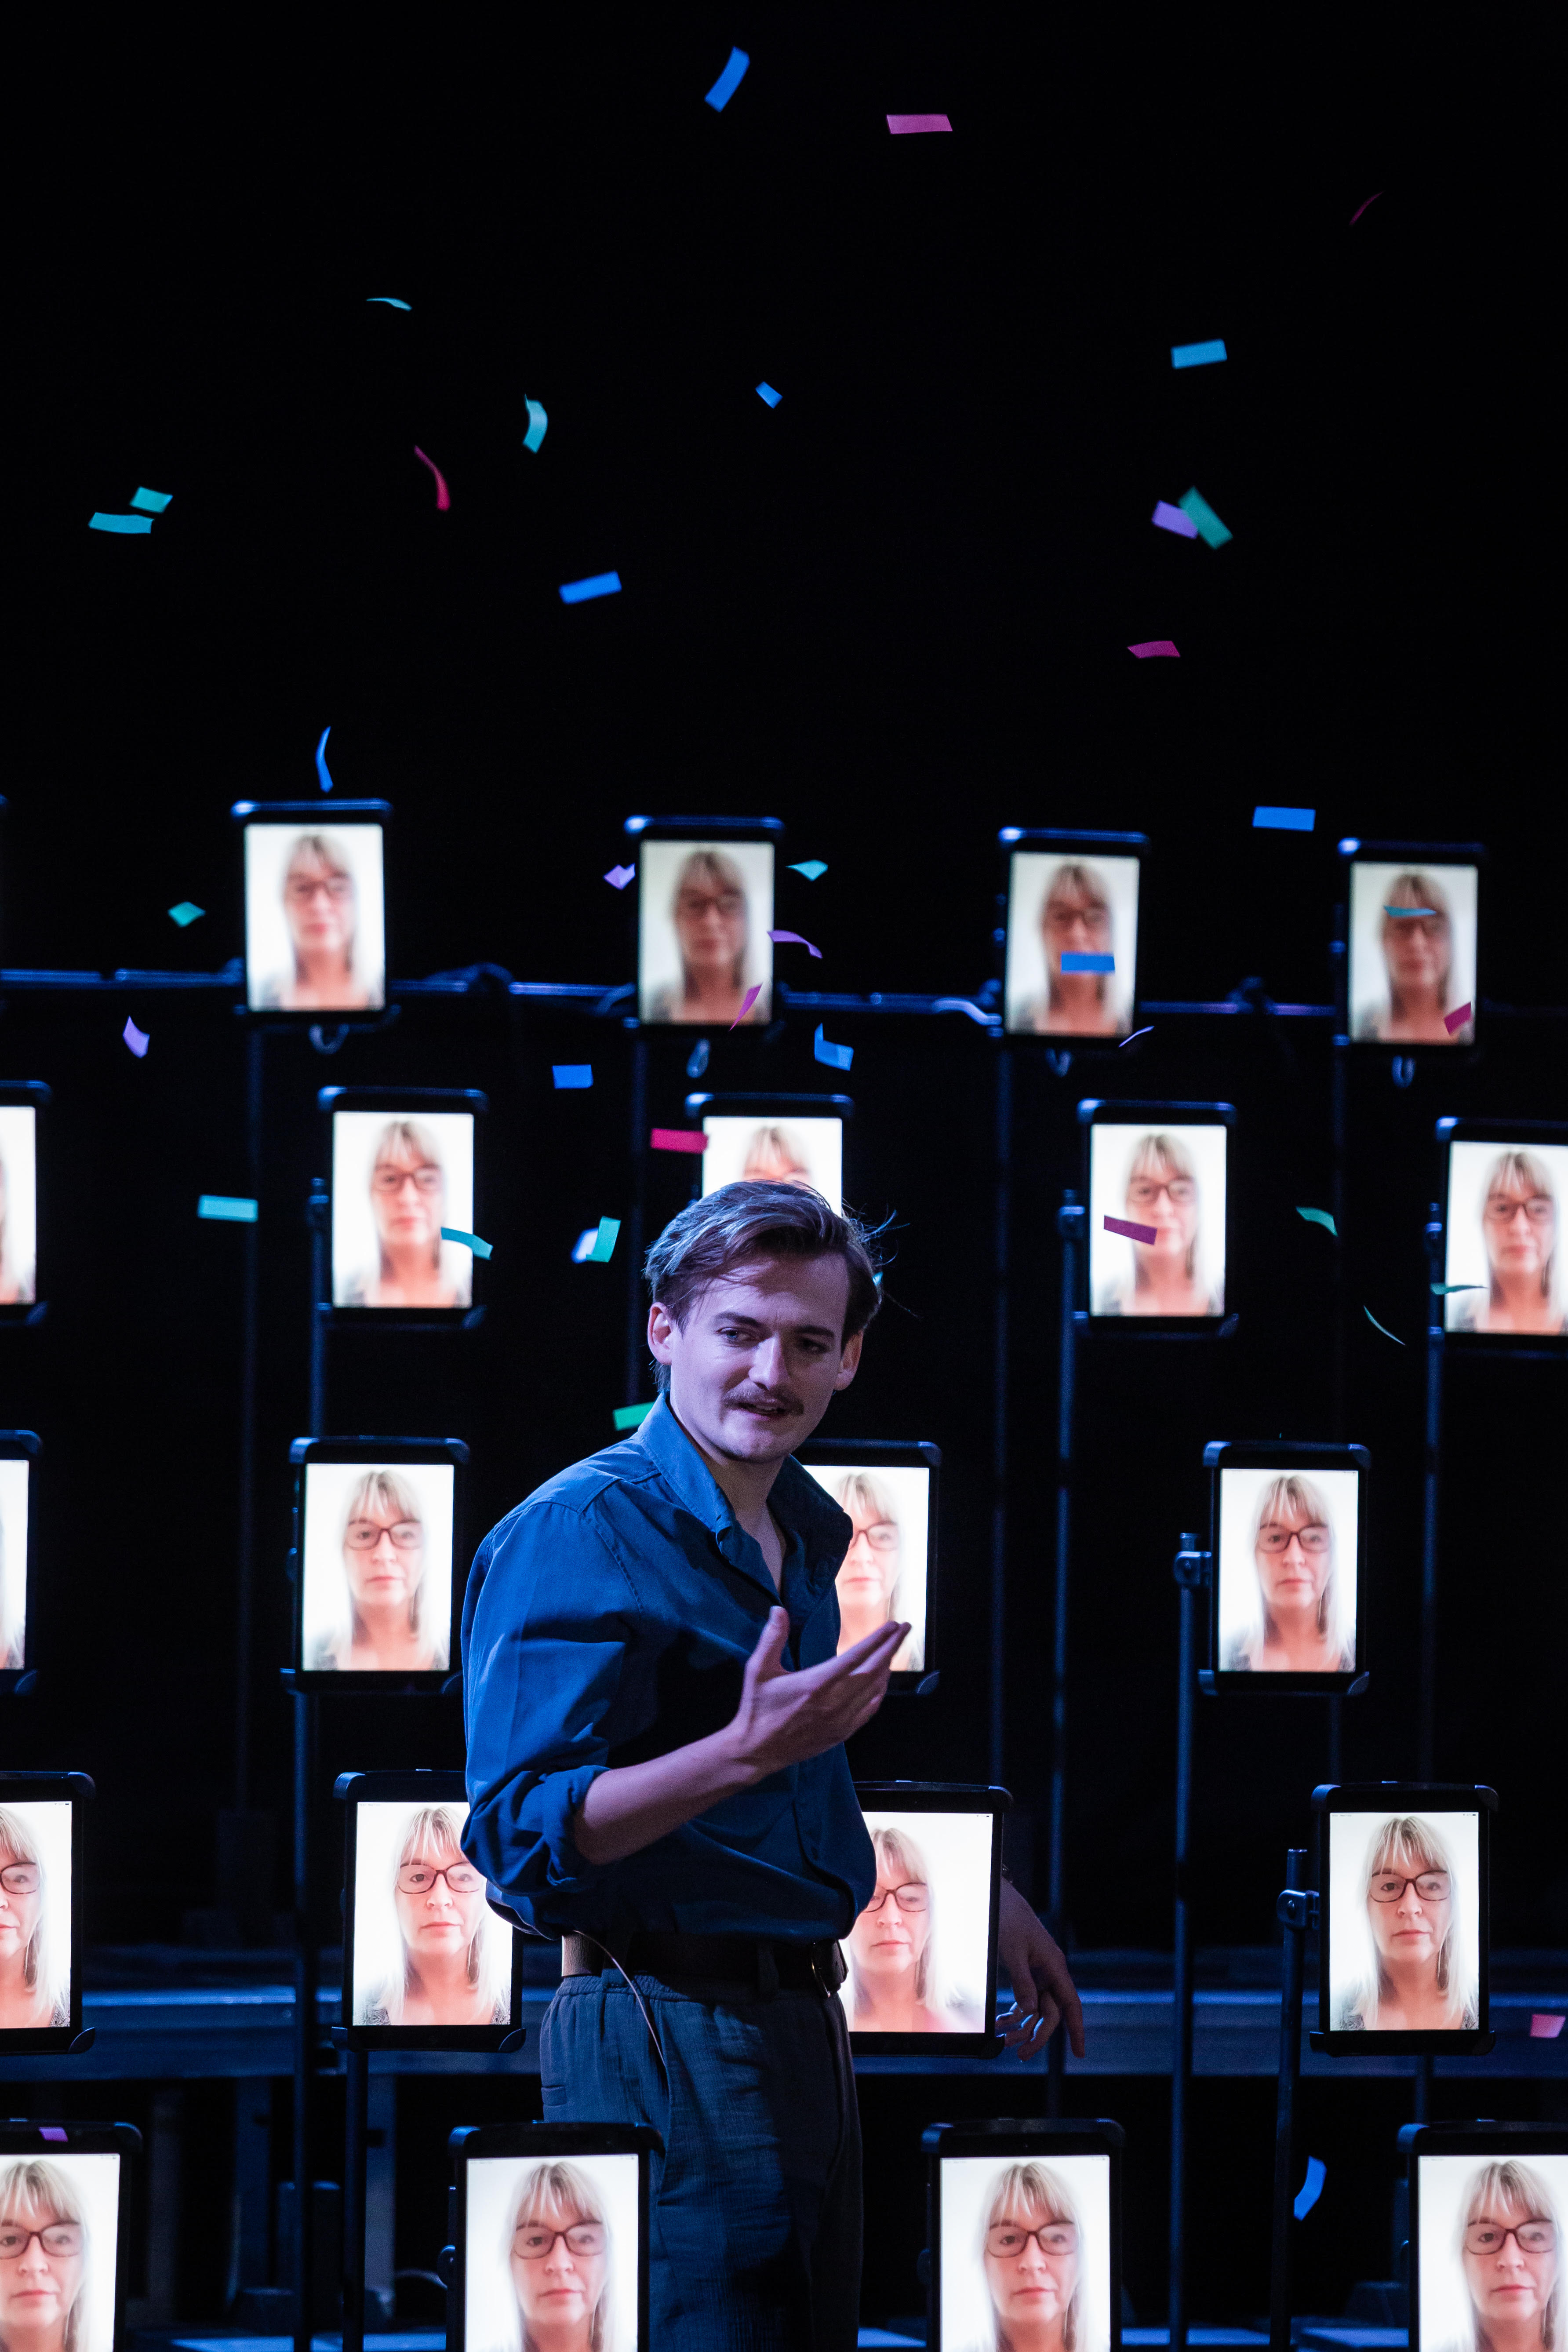 The 50th Hong Kong Arts Festival features an eclectic host of online performances for a global audience, including and To Be A Machine (Version 1.0), by Irish theater company Dead Centre (photo credit: Ste Murray).